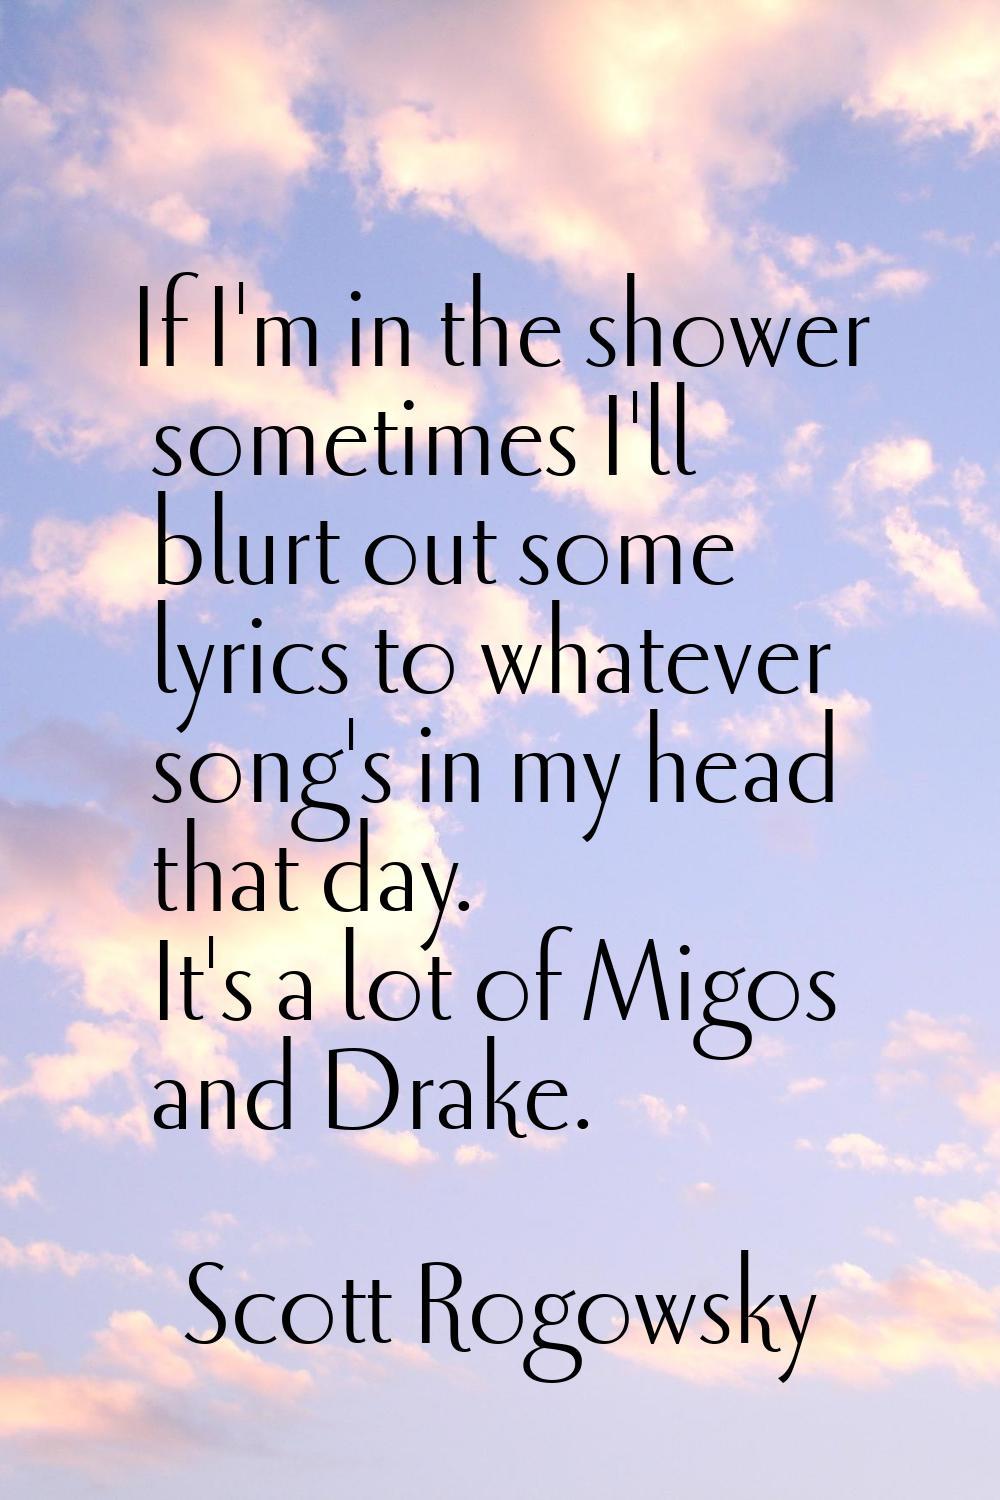 If I'm in the shower sometimes I'll blurt out some lyrics to whatever song's in my head that day. I